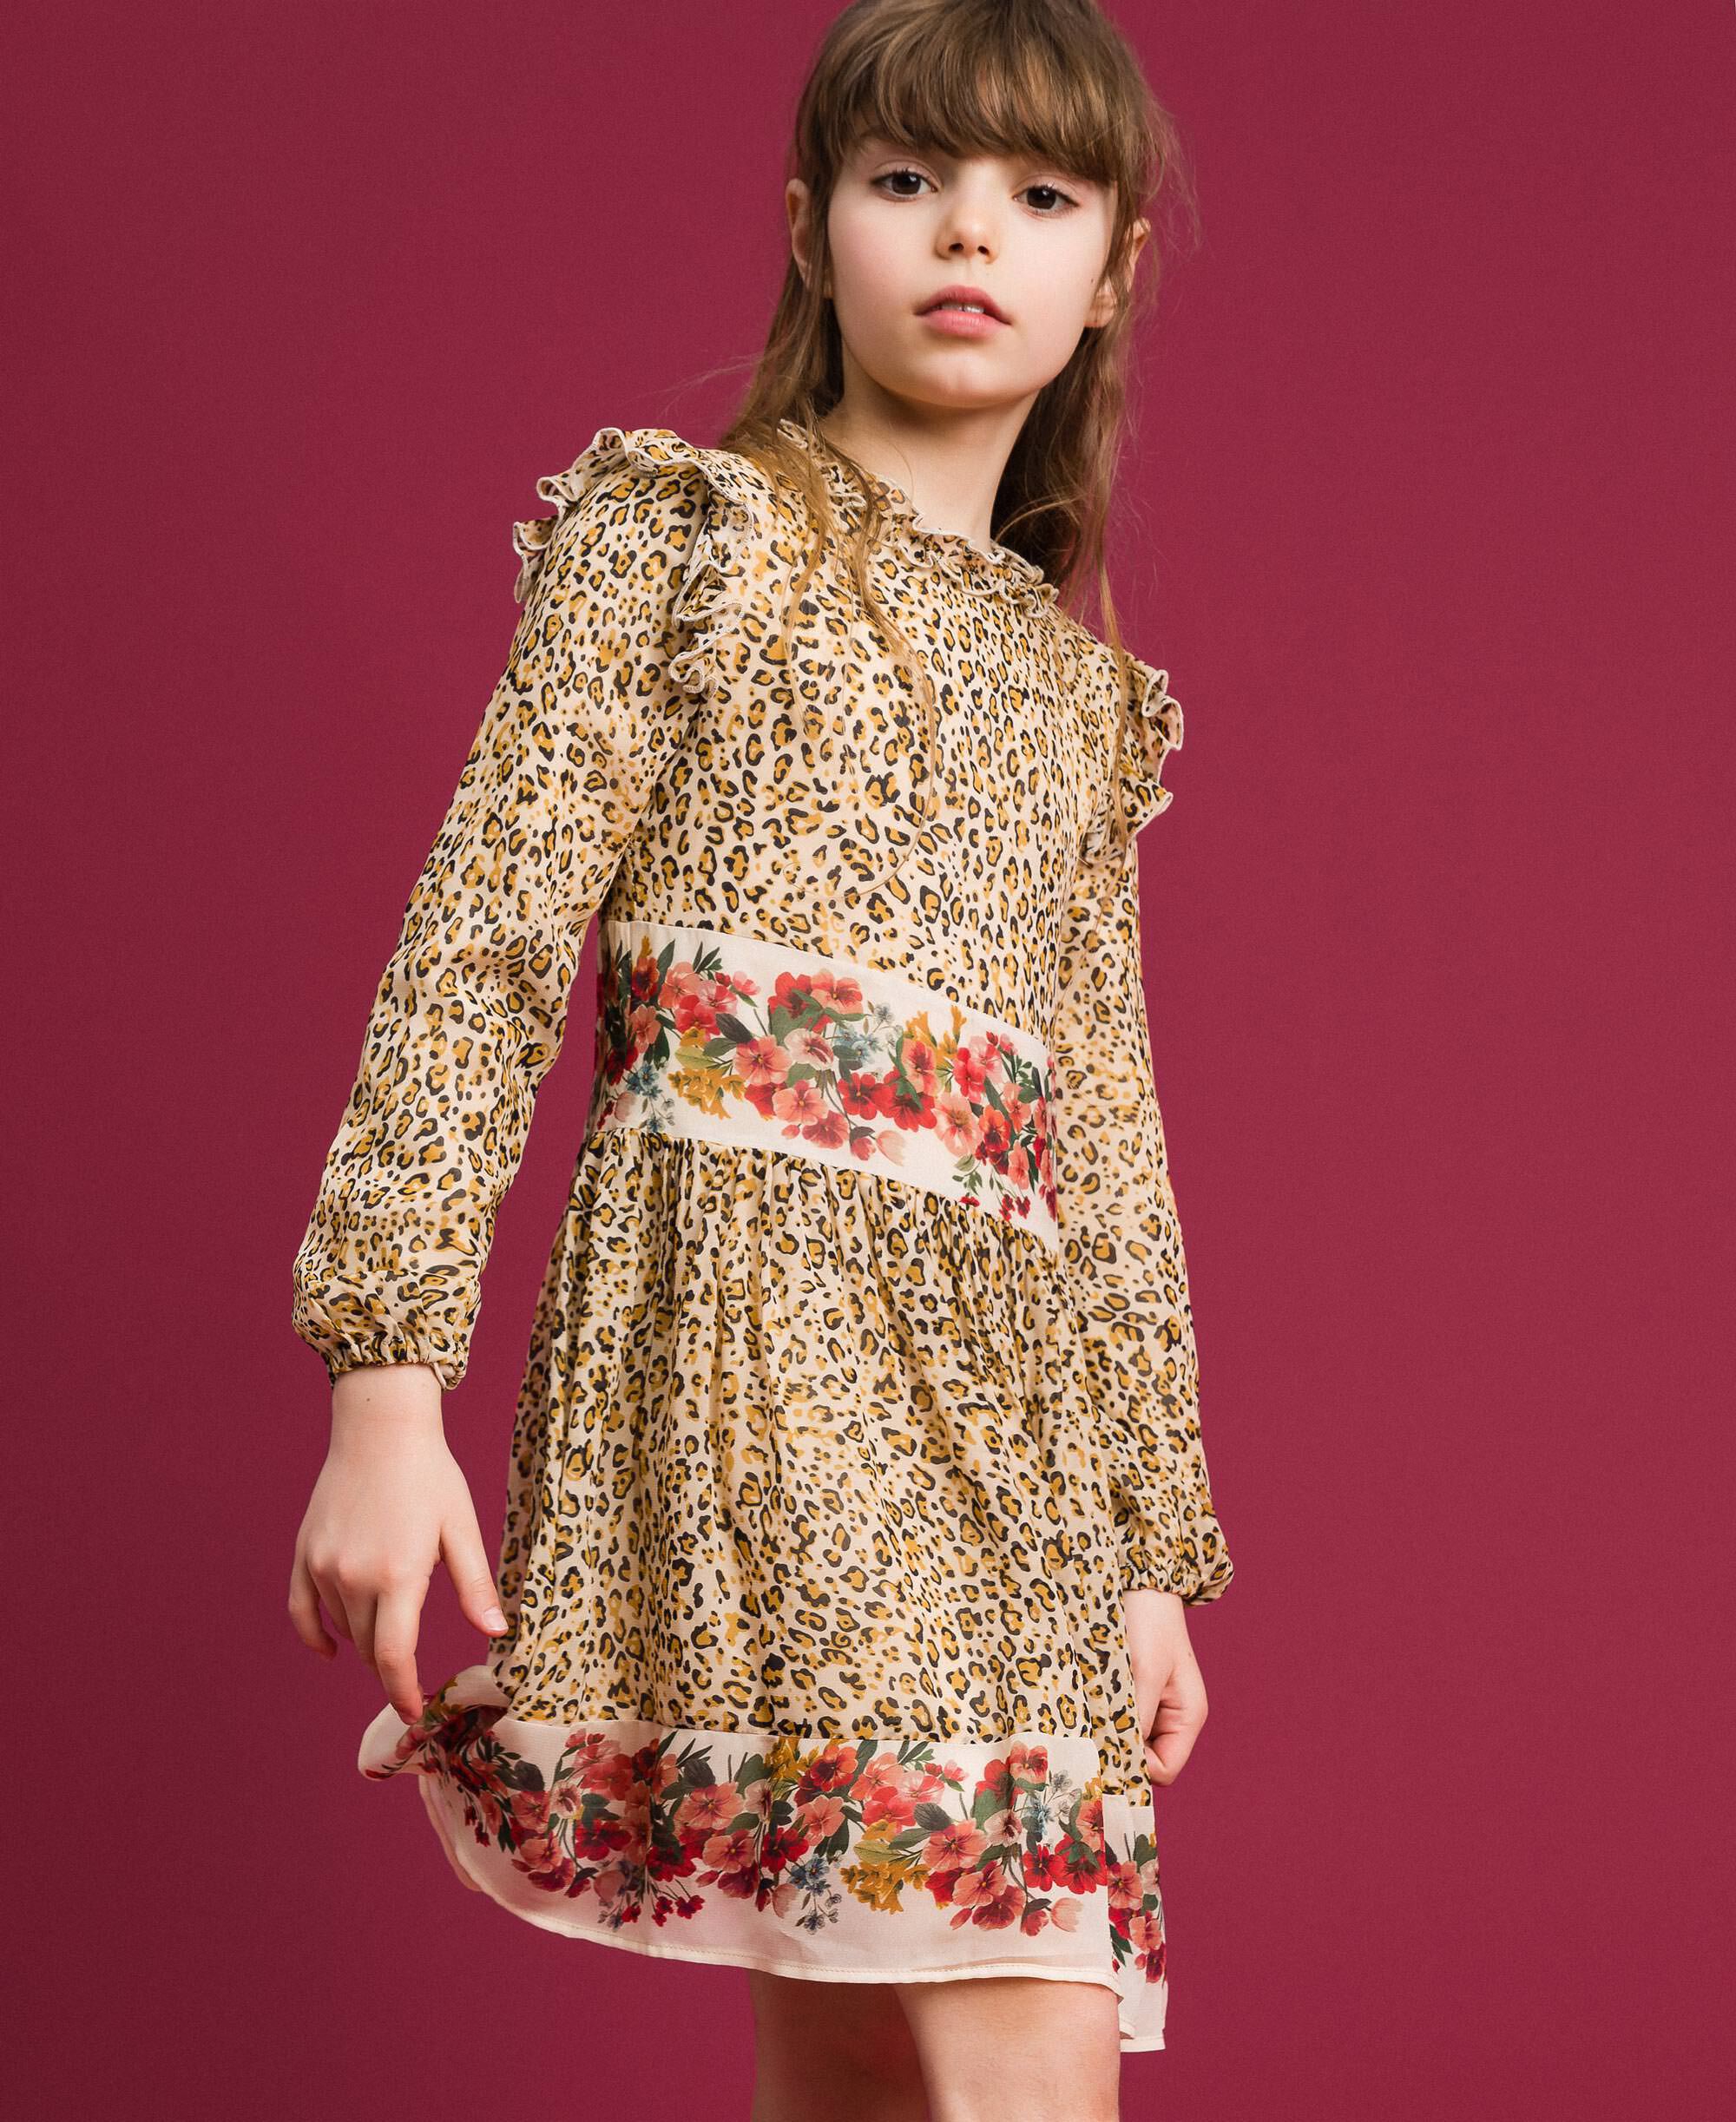 floral dress with leopard print sleeves